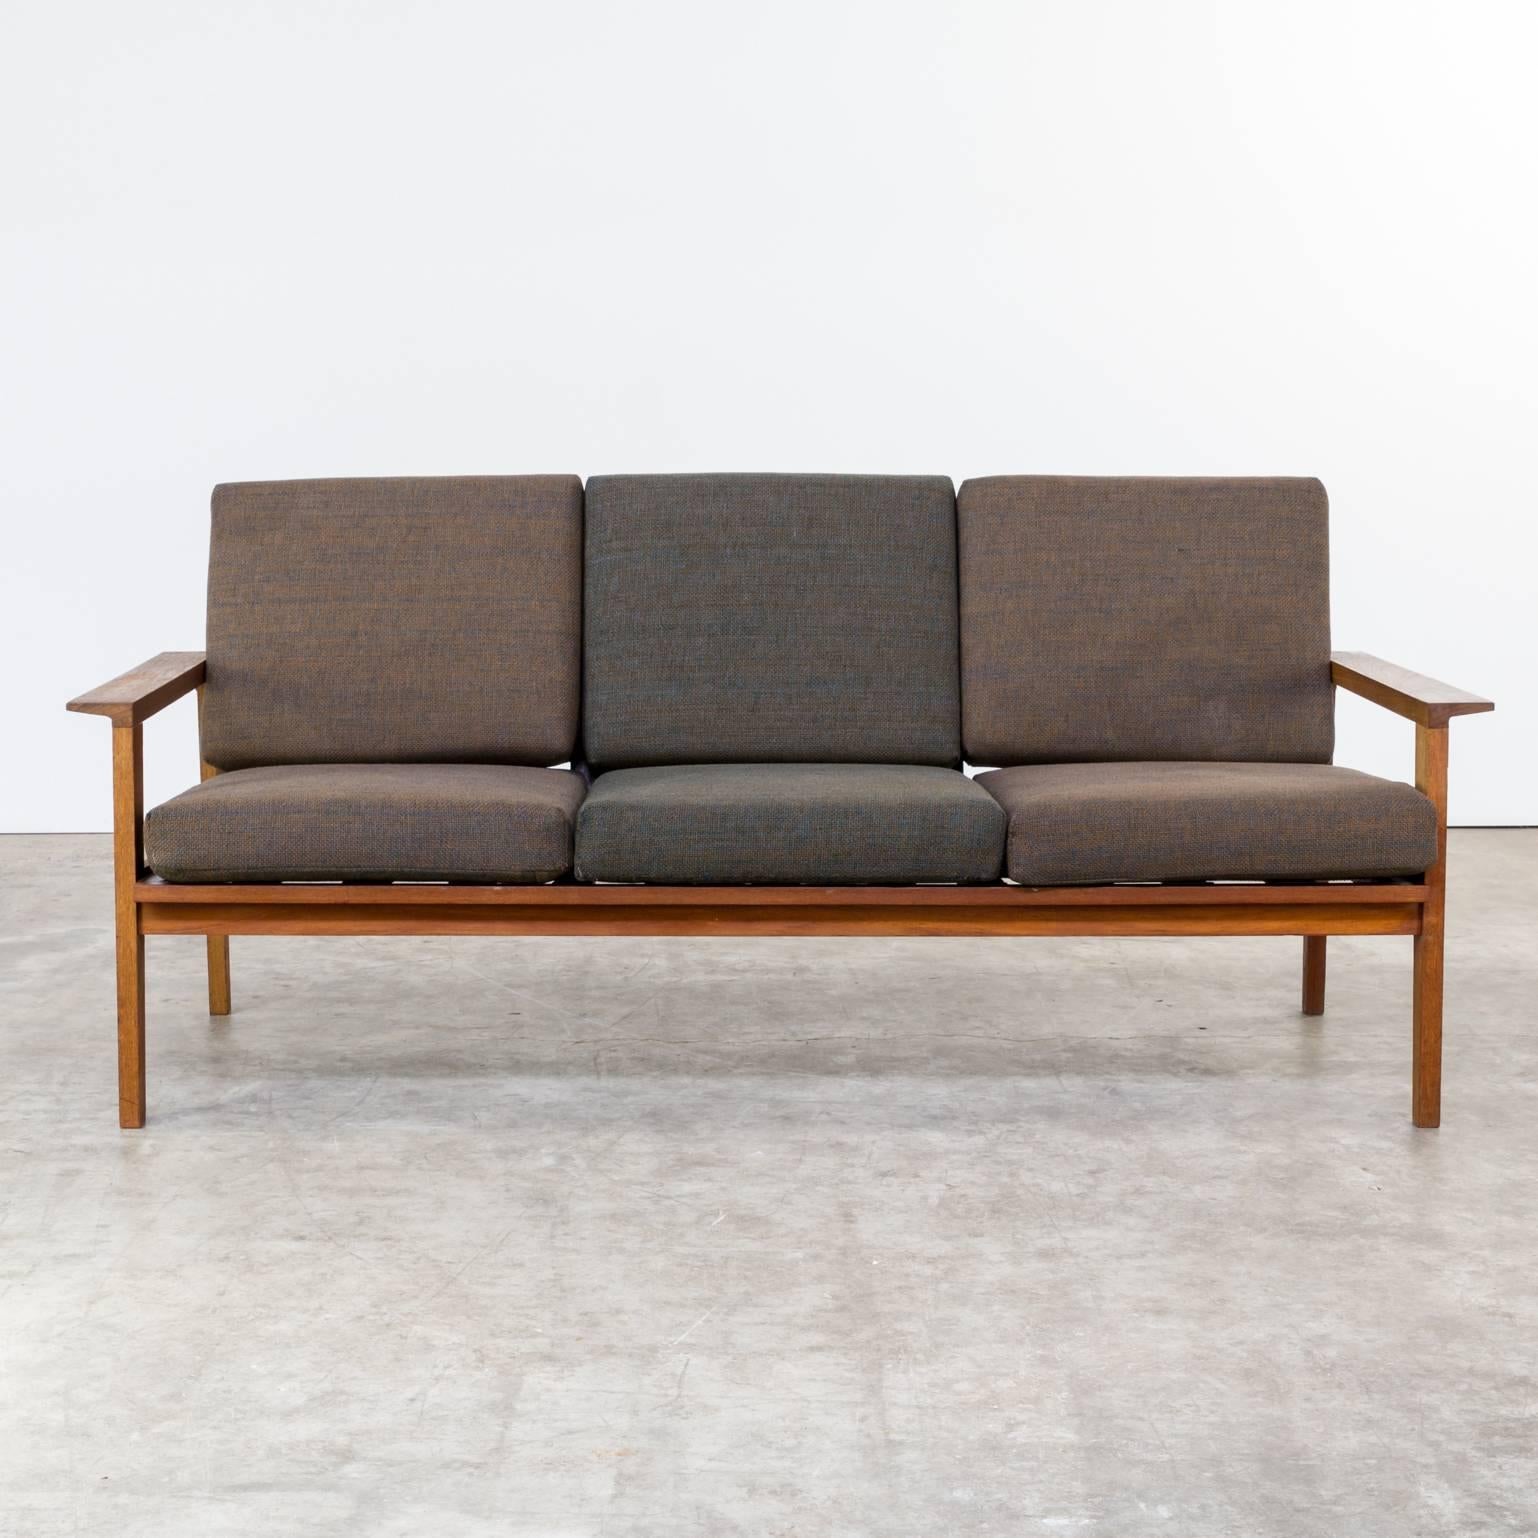 1960s Teak Seating Group One Three-Seat Sofa, Two Fauteuils In Good Condition For Sale In Amstelveen, Noord